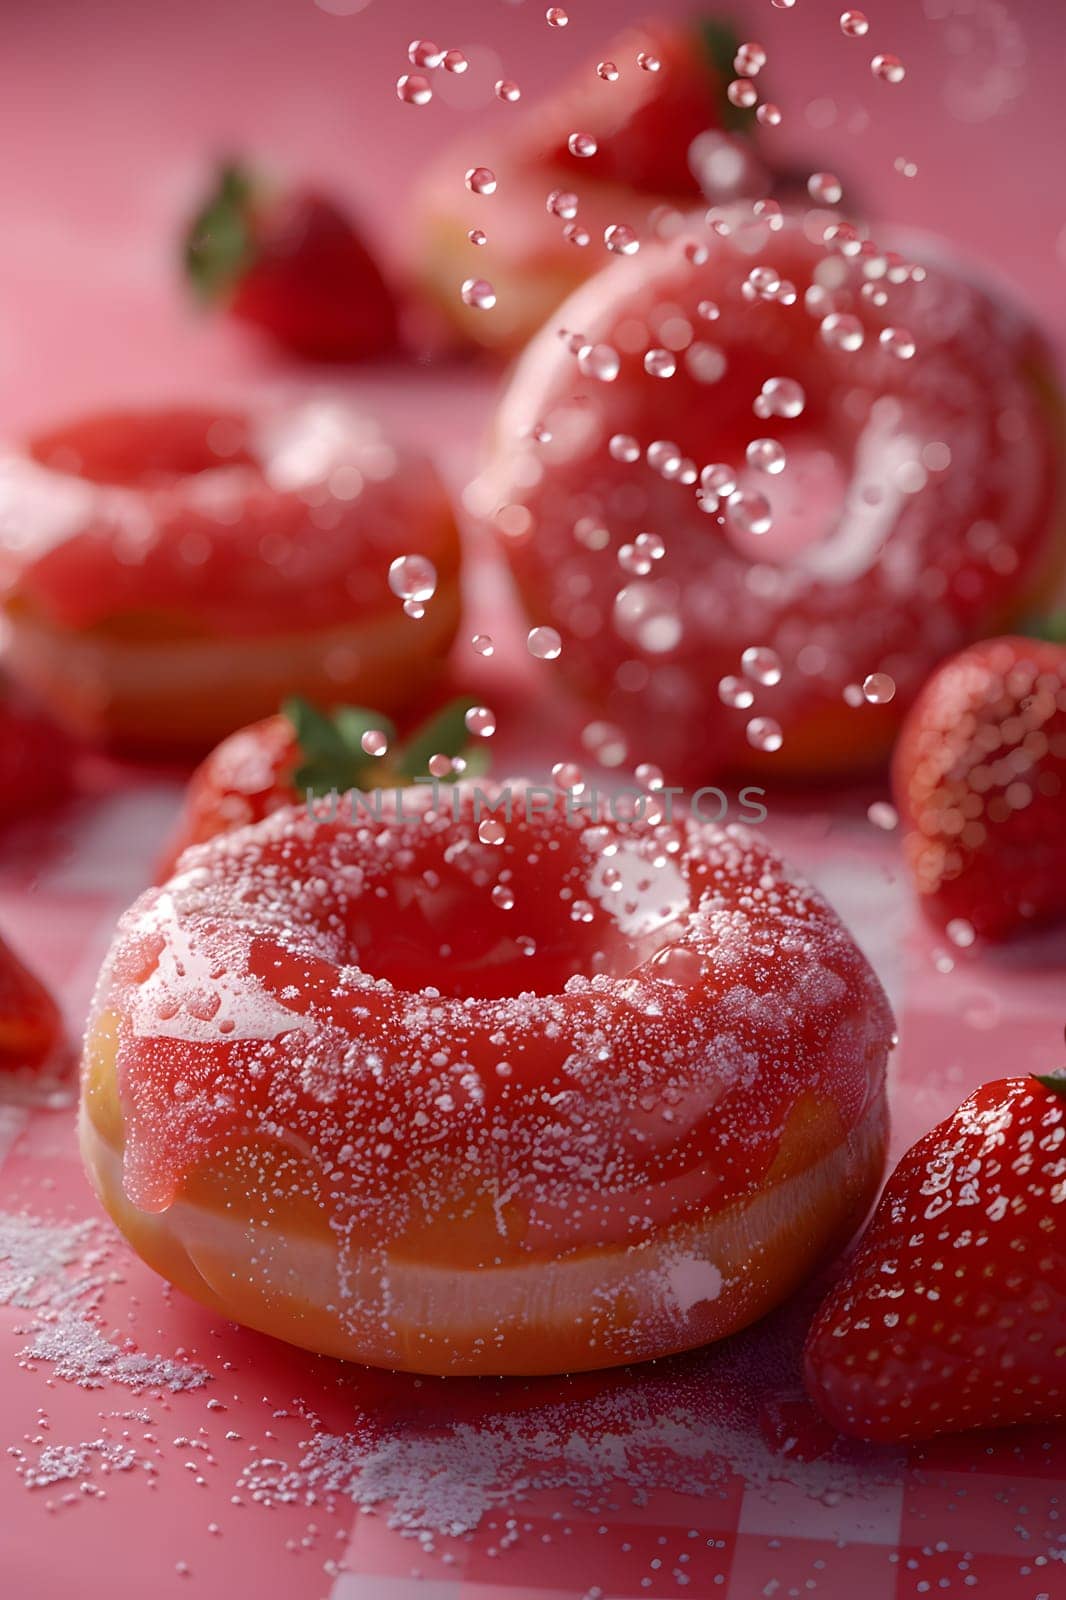 Delicious strawberry donuts with powdered sugar, topped with fresh strawberries by Nadtochiy